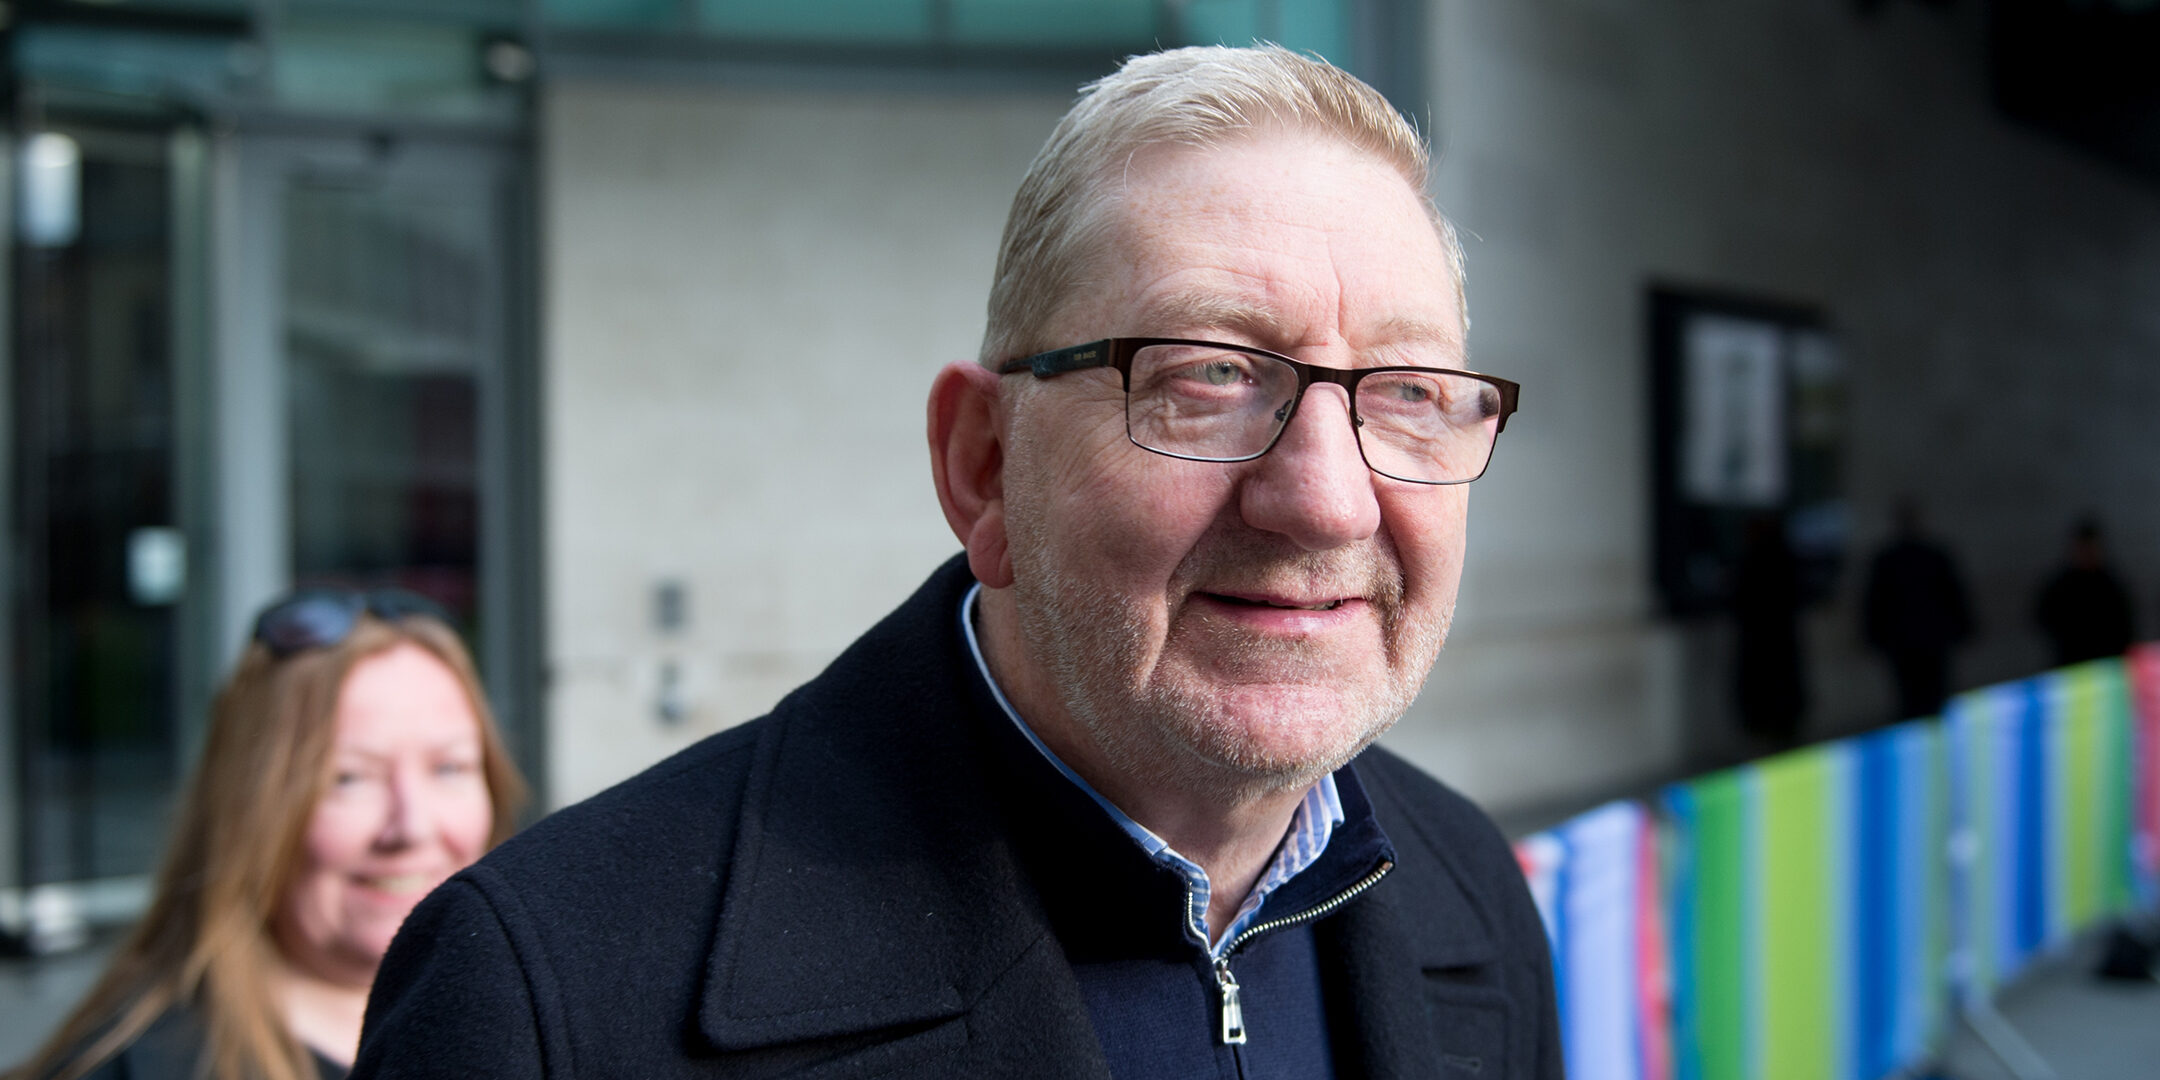 General Secretary of Unite the Union Len McCluskey leaves the BBC Broadcasting House in London, England on November 17, 2019. (Ollie Millington/Getty Images)